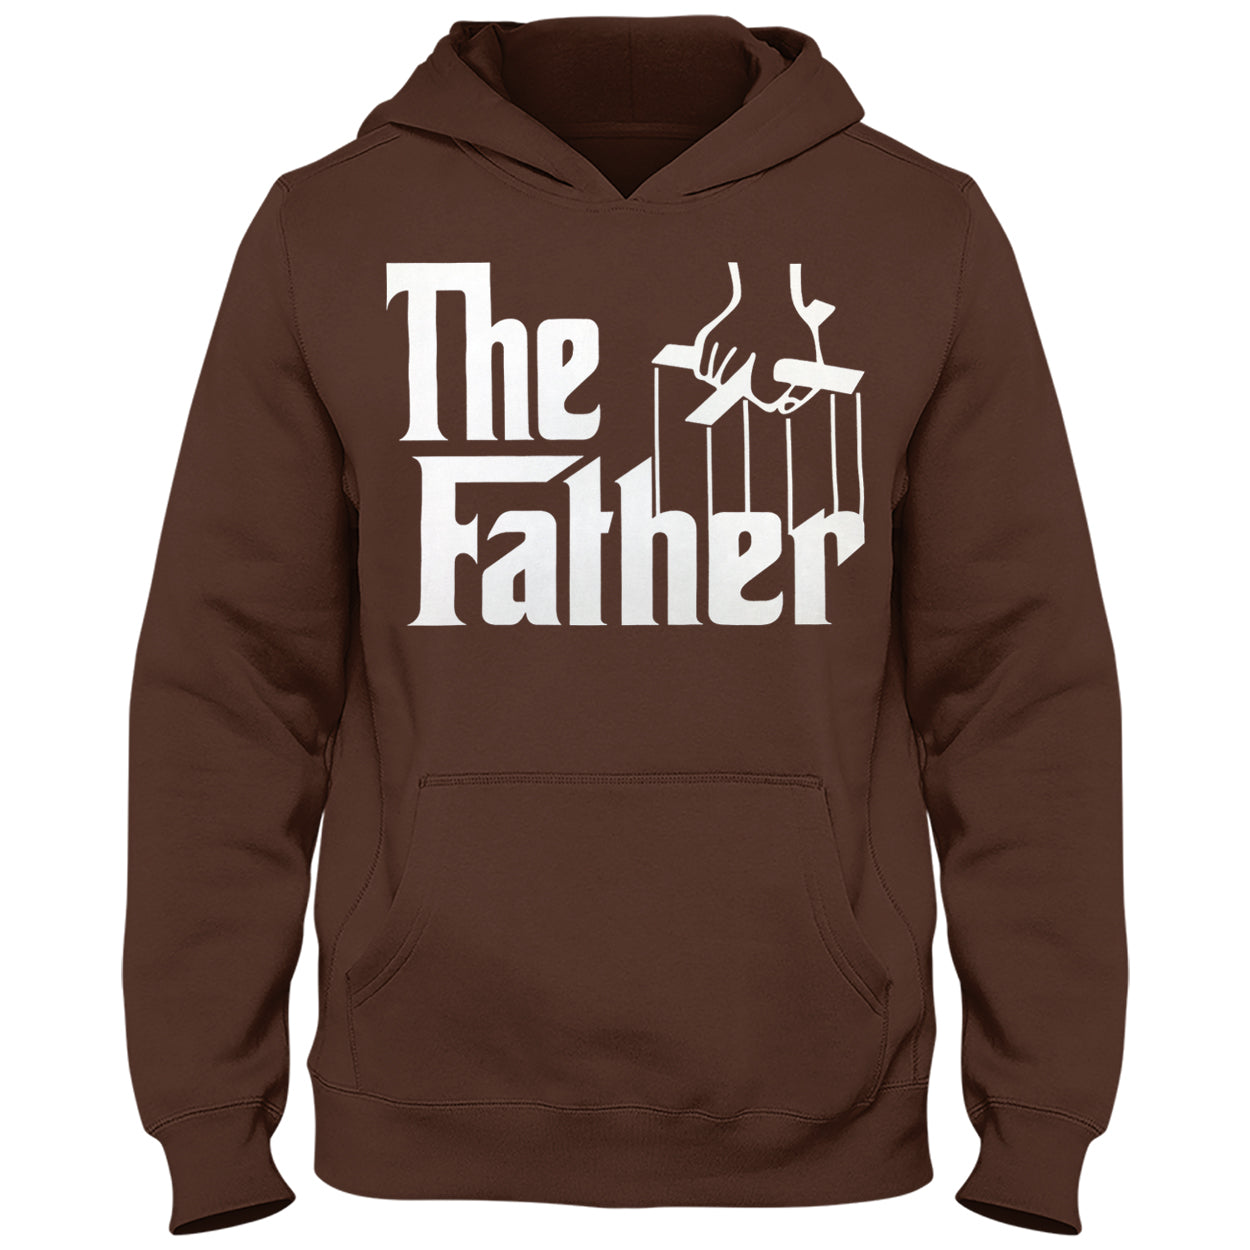 The Father Funny Adult Hoodie